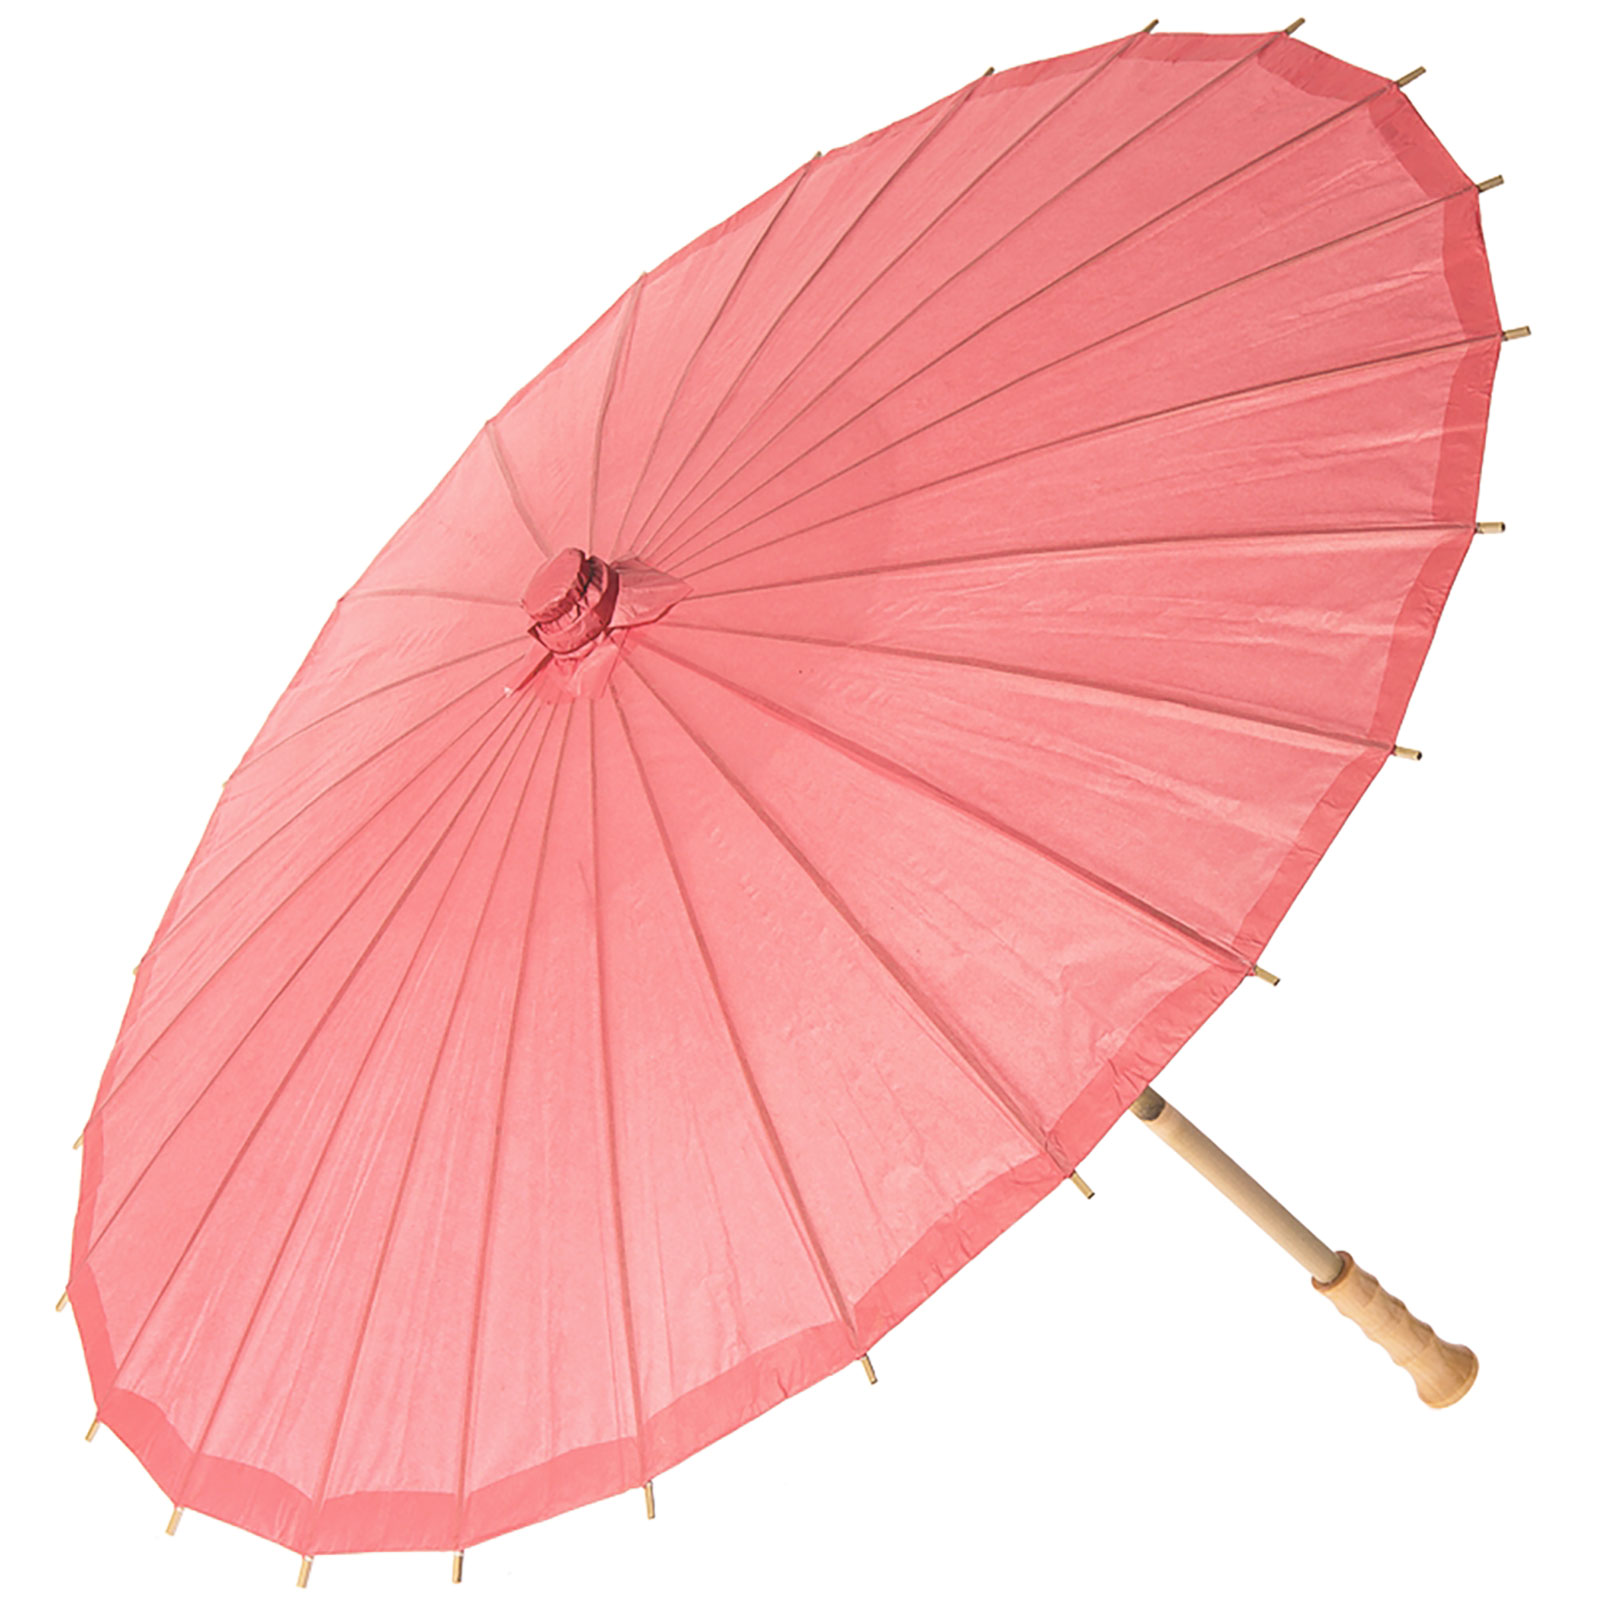 Chinese Paper and Bamboo Parasol with Elegant Handle - Coral Pink